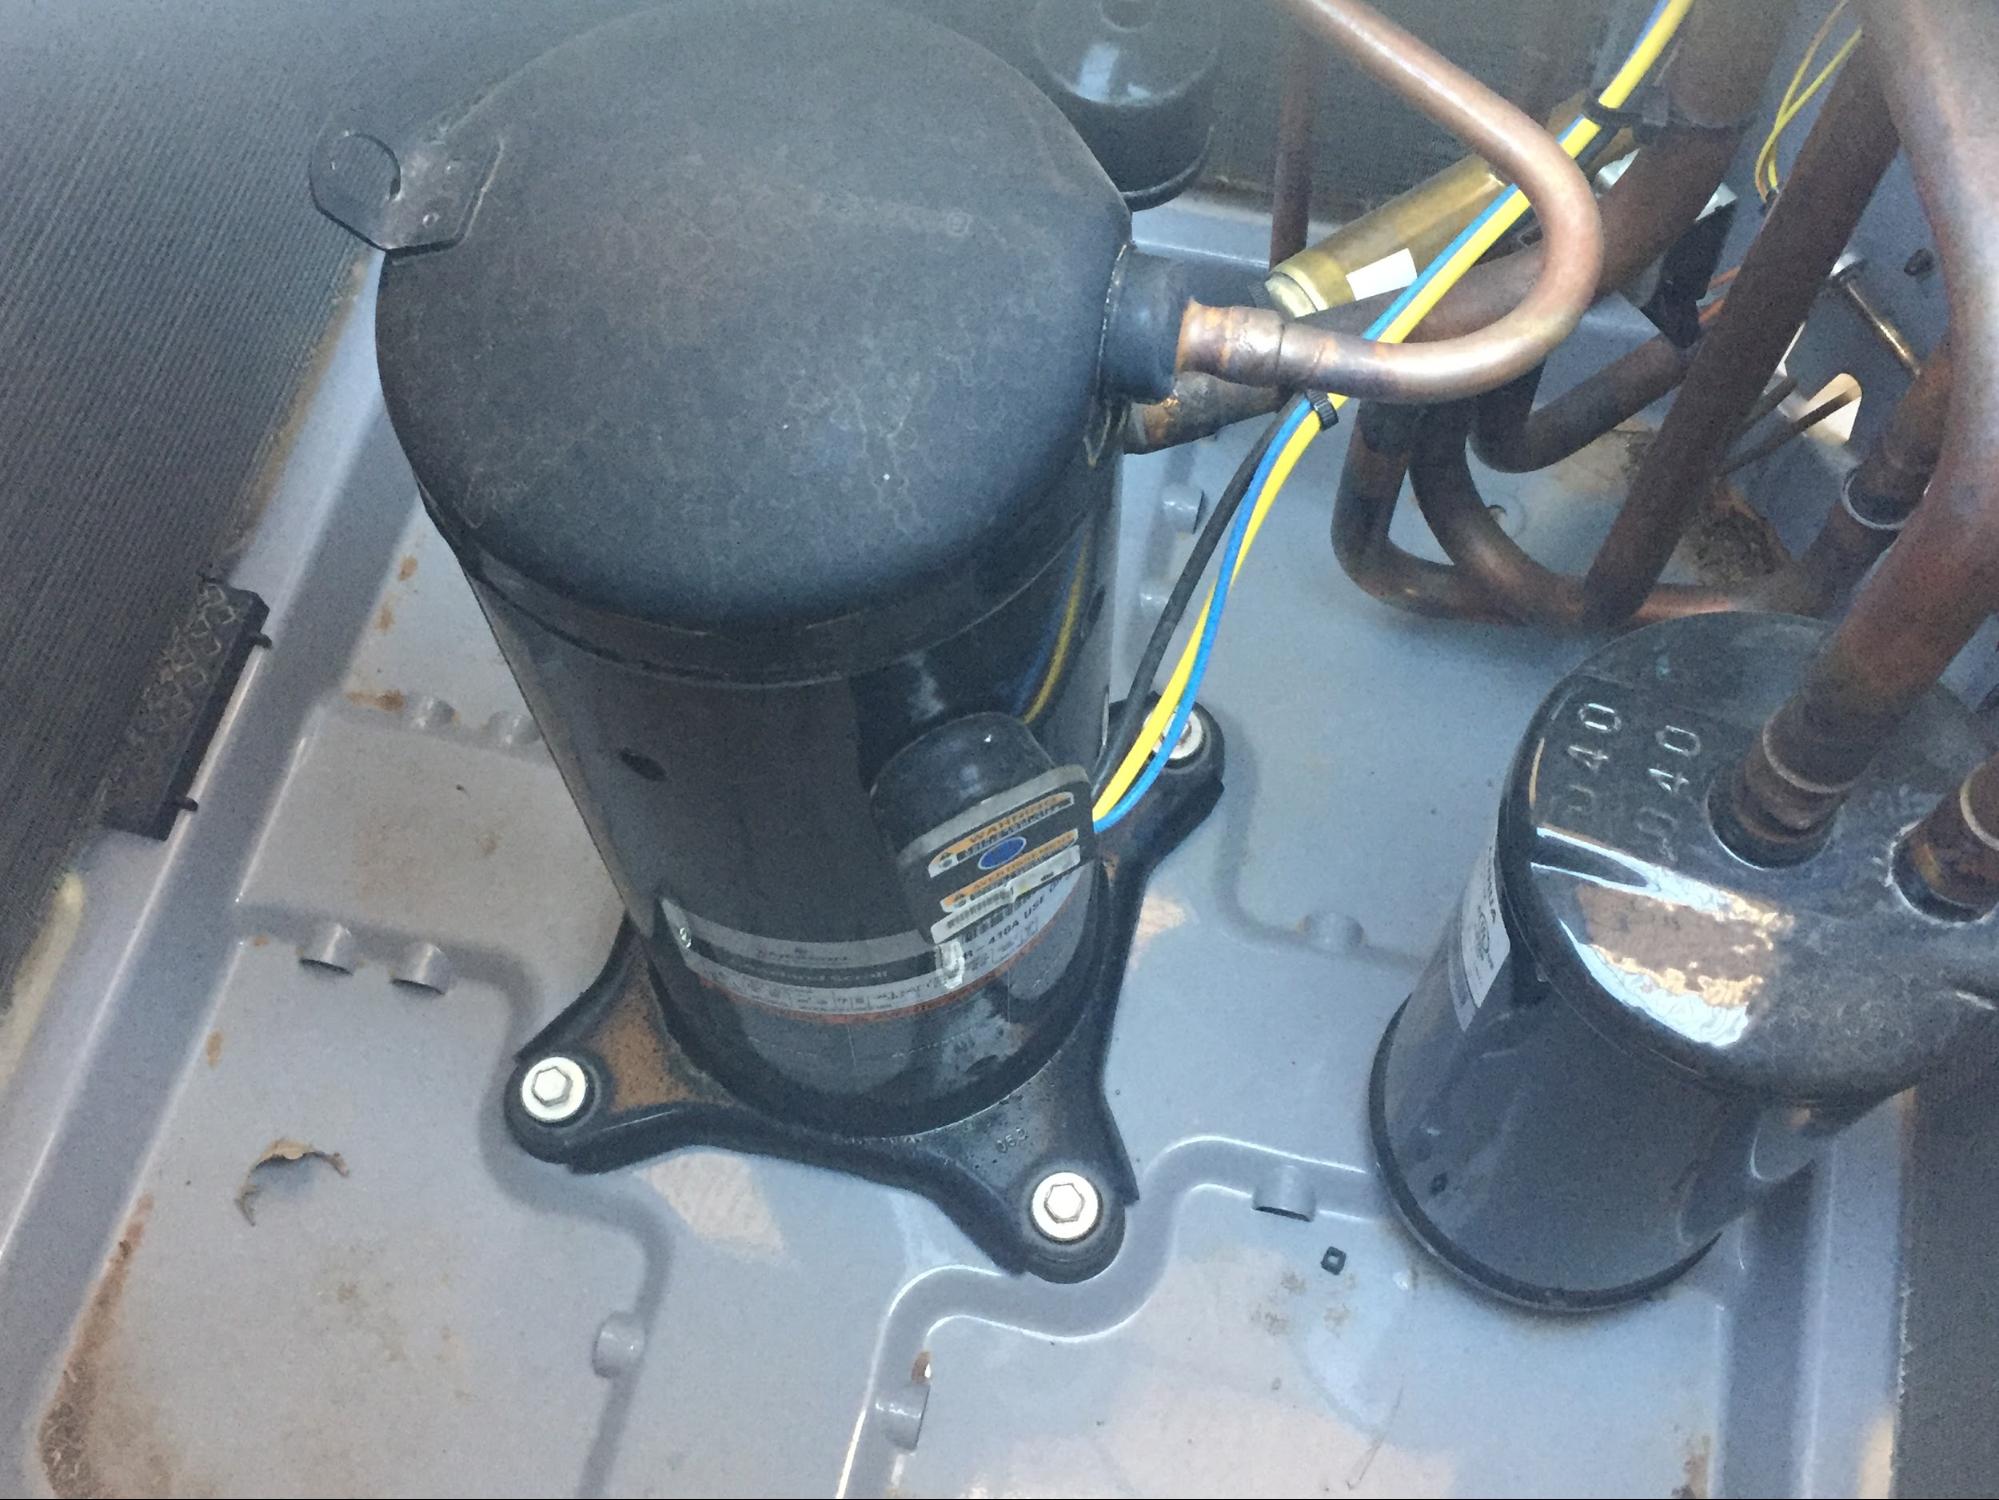 The compressor of a central air conditioner